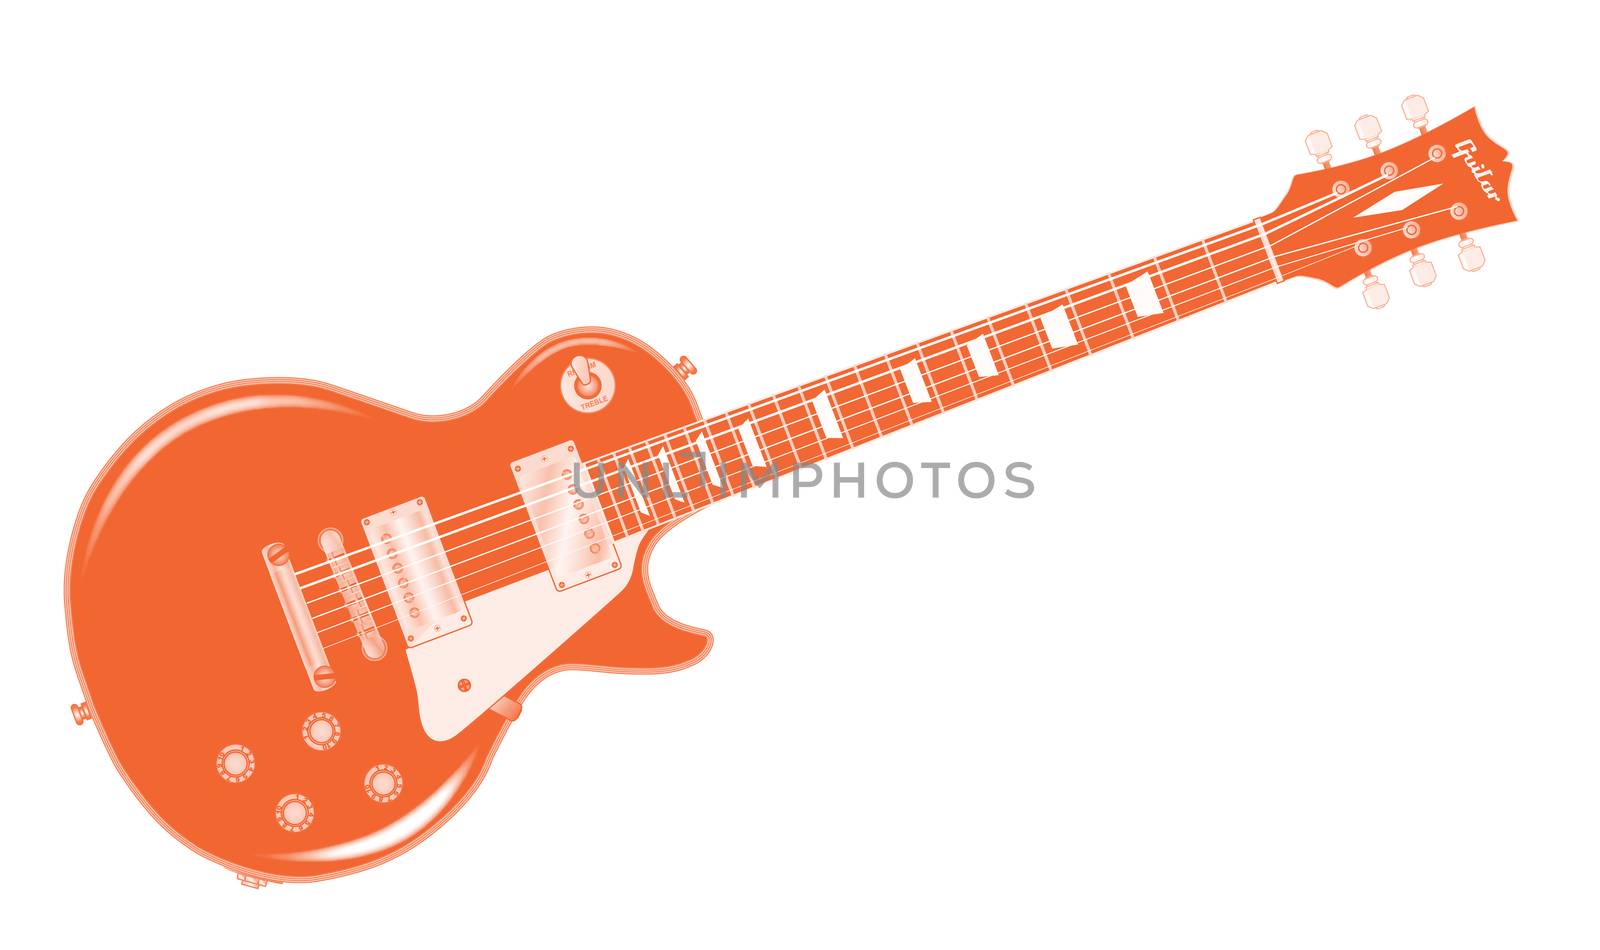 The definitive rock and roll guitar in black, isolated over a white background.